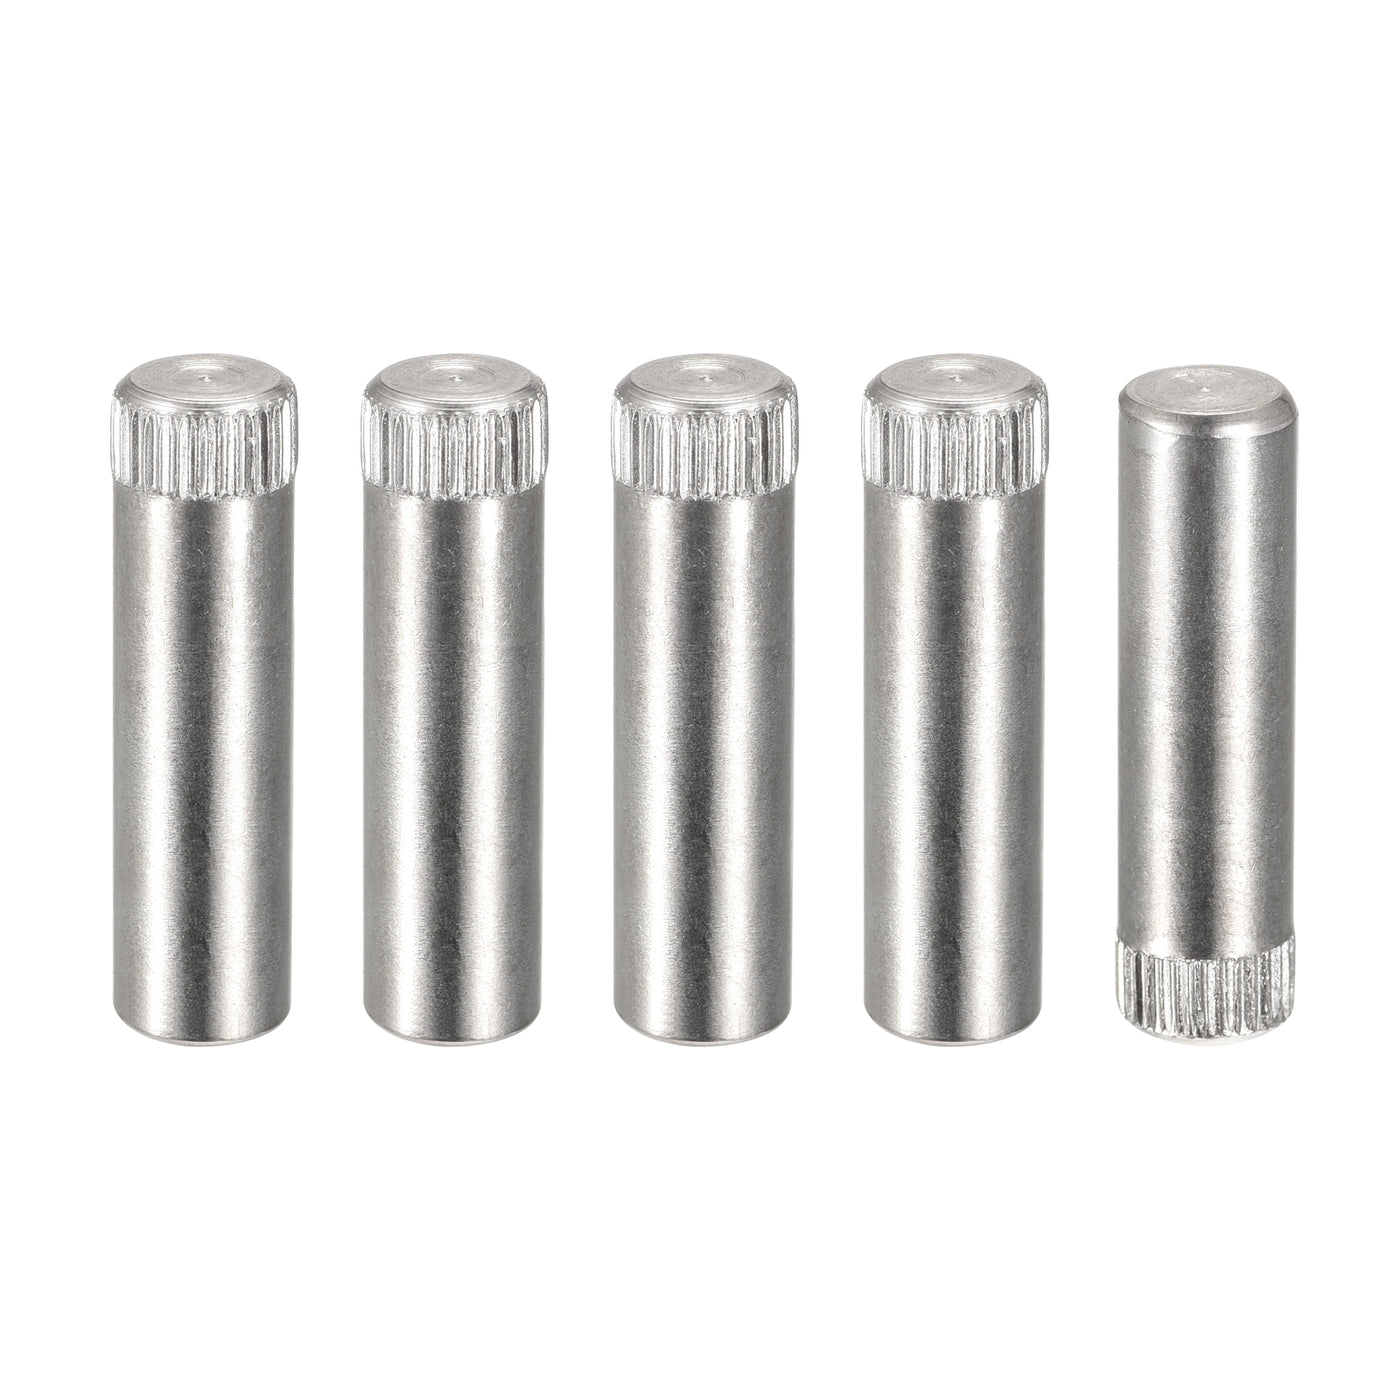 uxcell Uxcell 8x30mm 304 Stainless Steel Dowel Pins, 5Pcs Knurled Head Flat End Dowel Pin